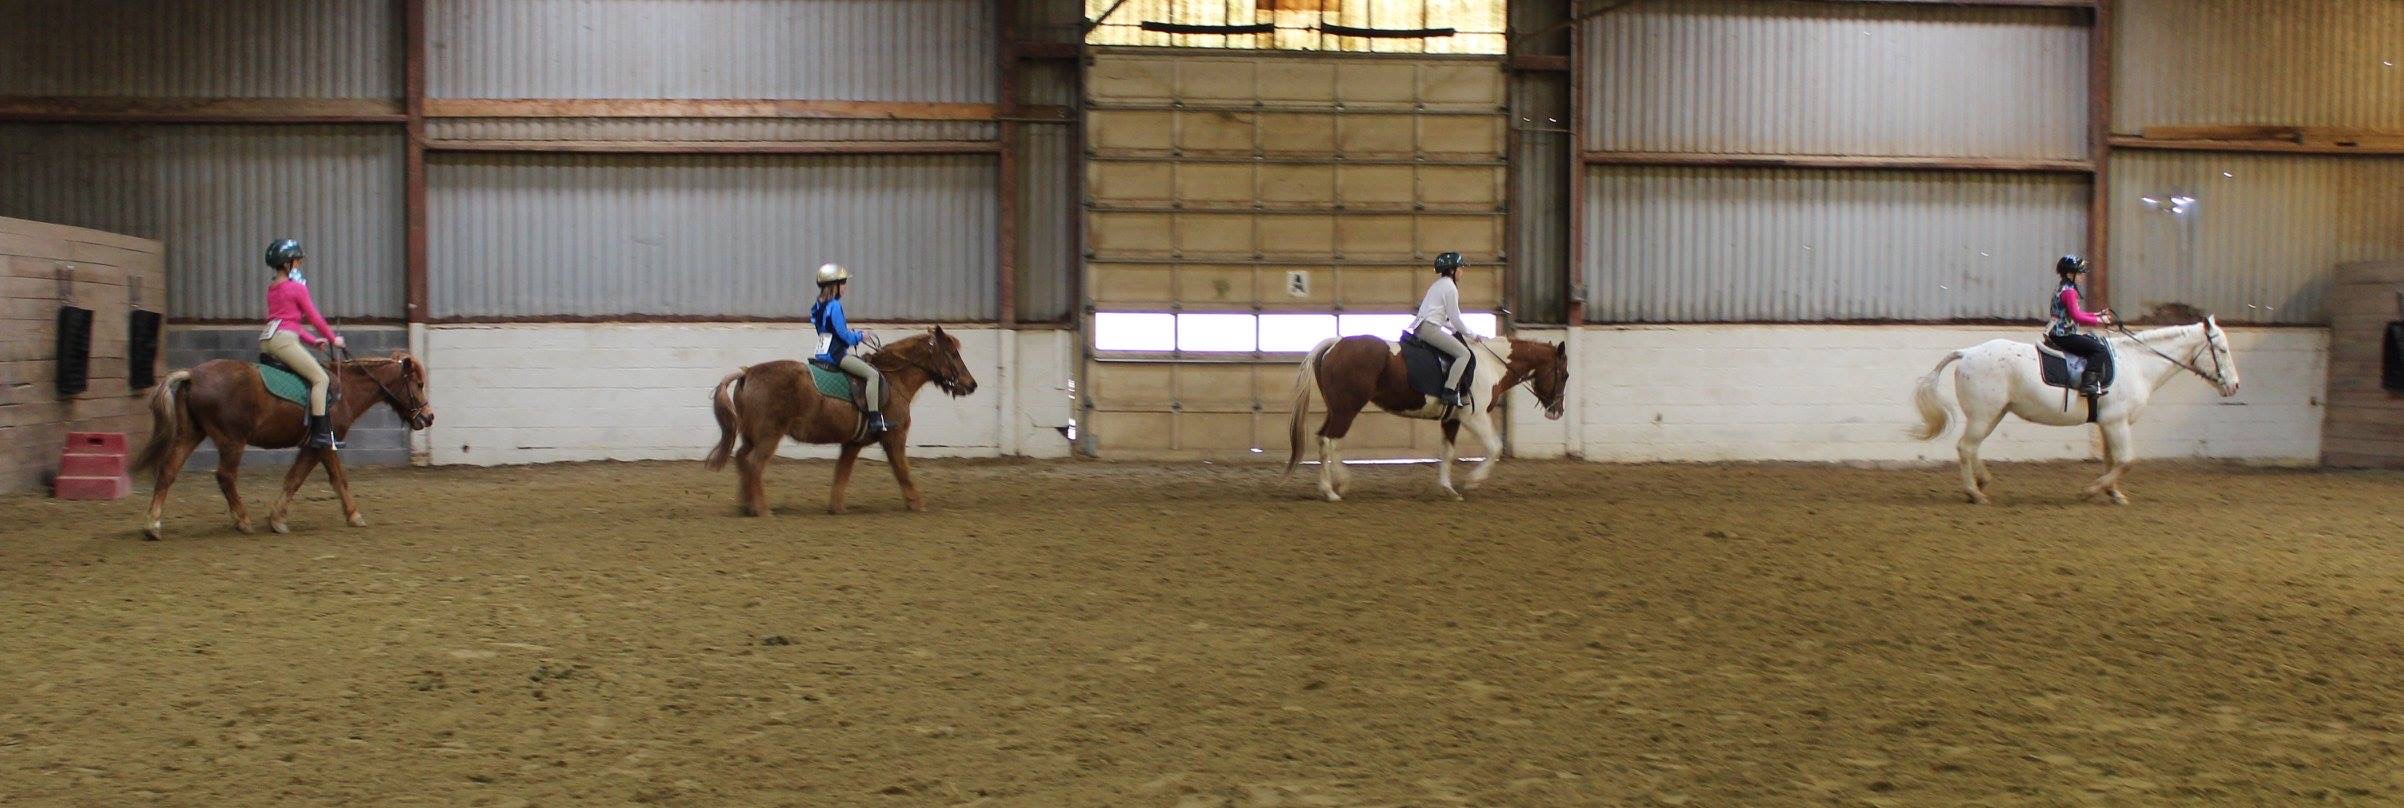 A panoramic shot of students lined up on horseback during riding lessons